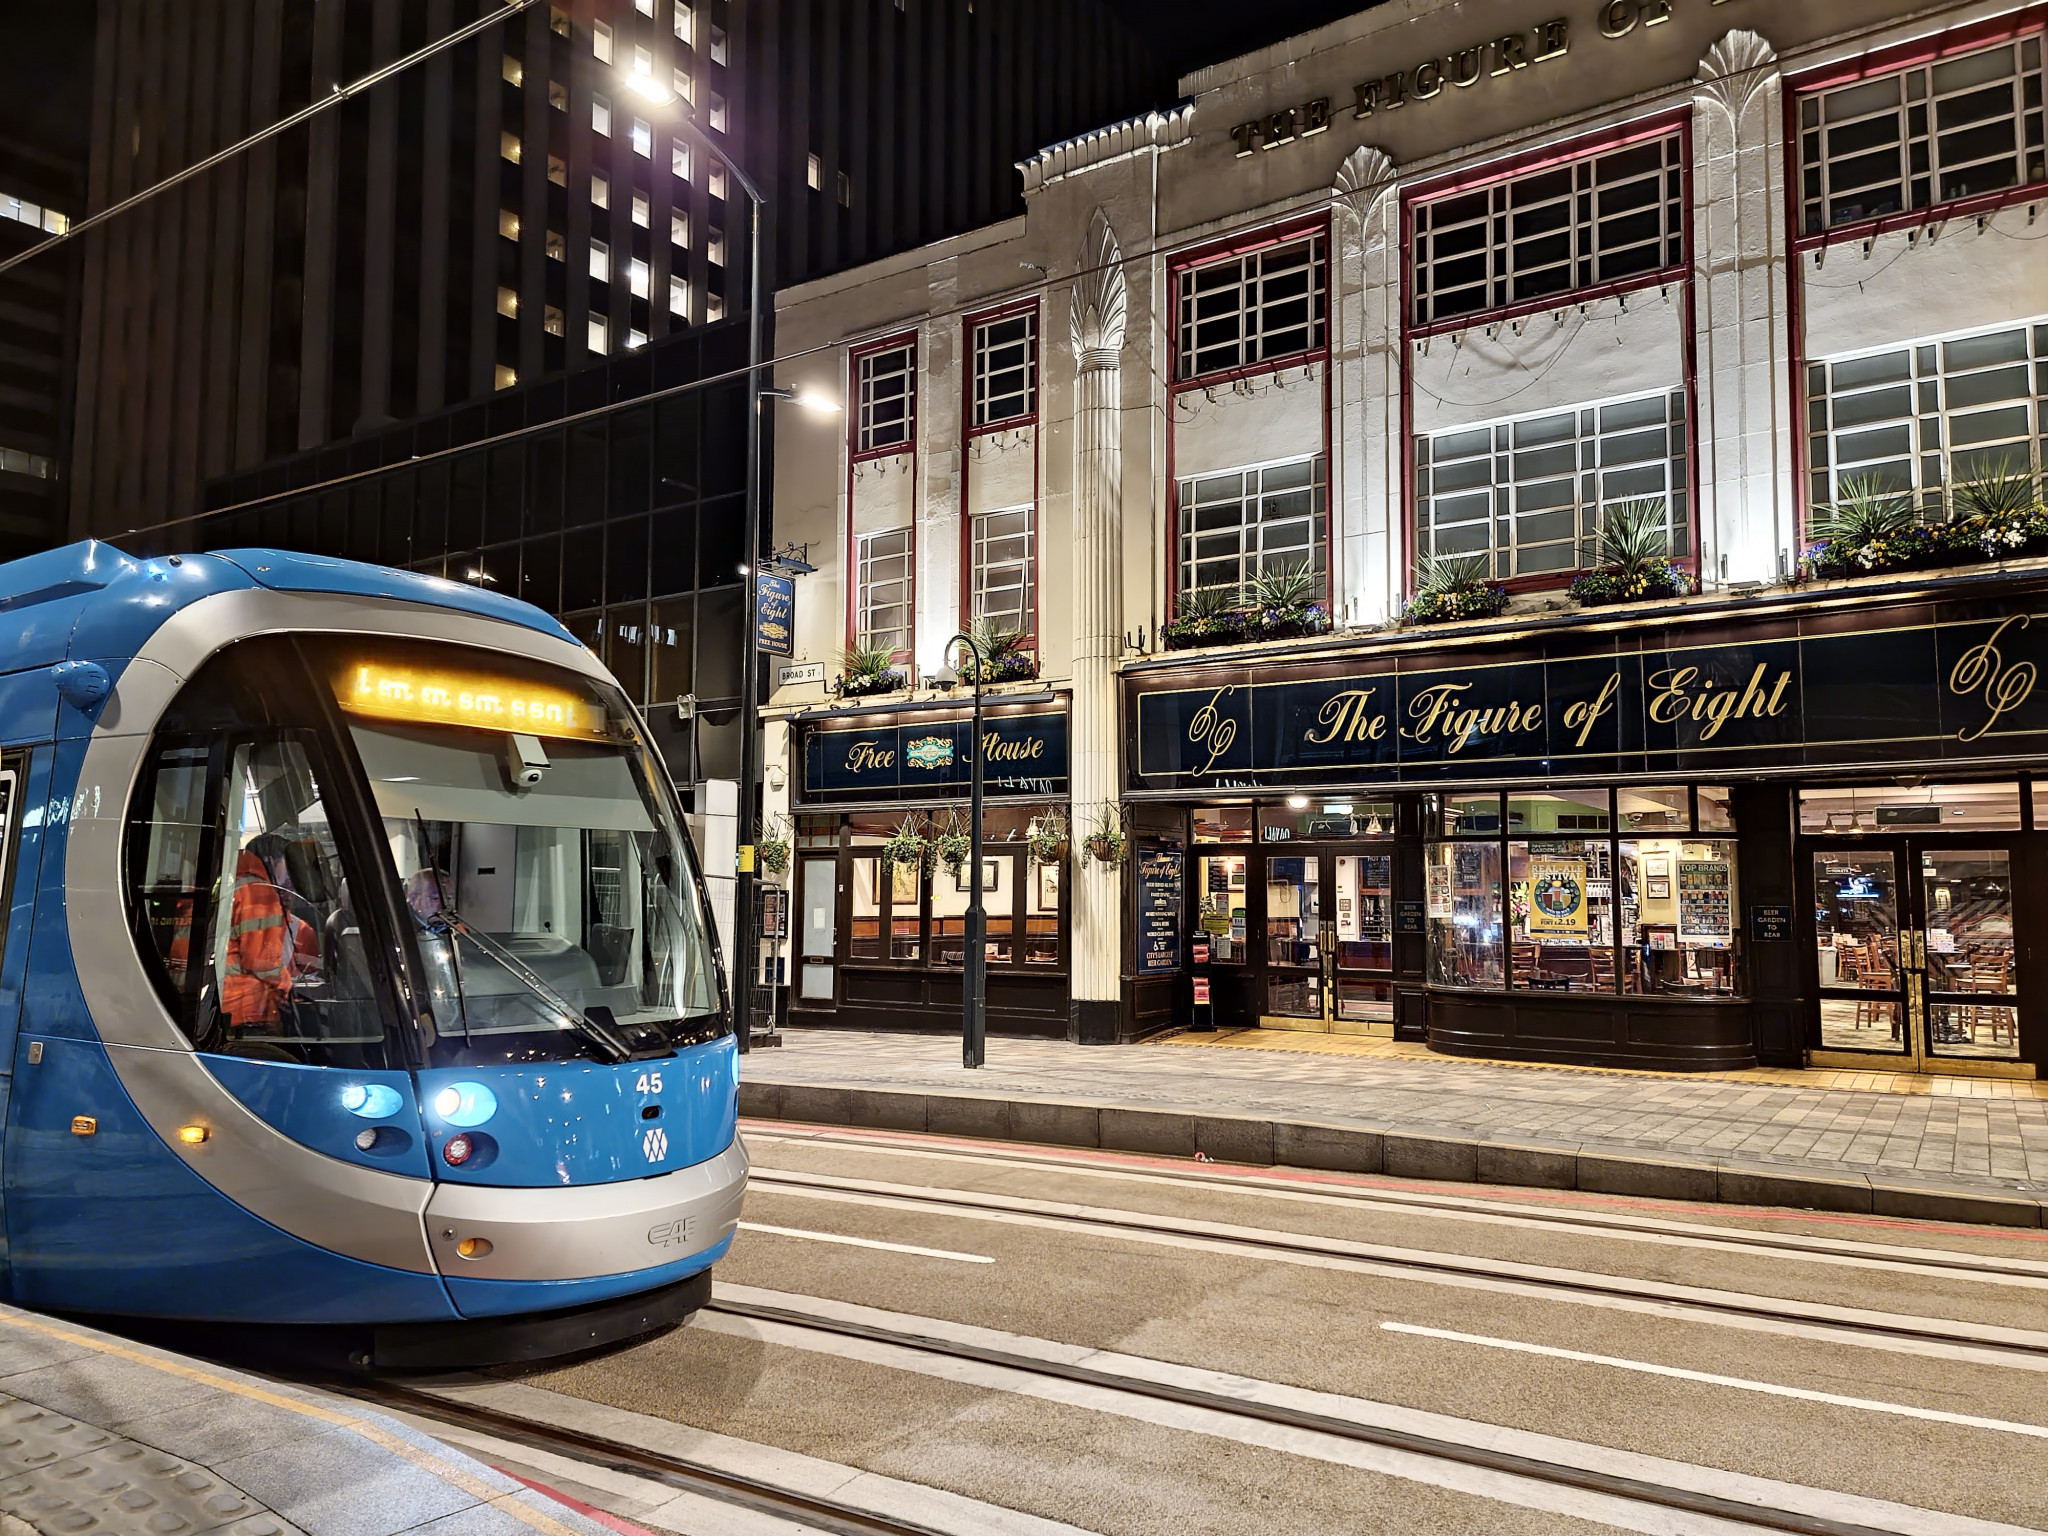 Birmingham has received a massive transport boost in time for the 2022 Commonwealth Games after the opening of new tram spots ©West Midlands Metro